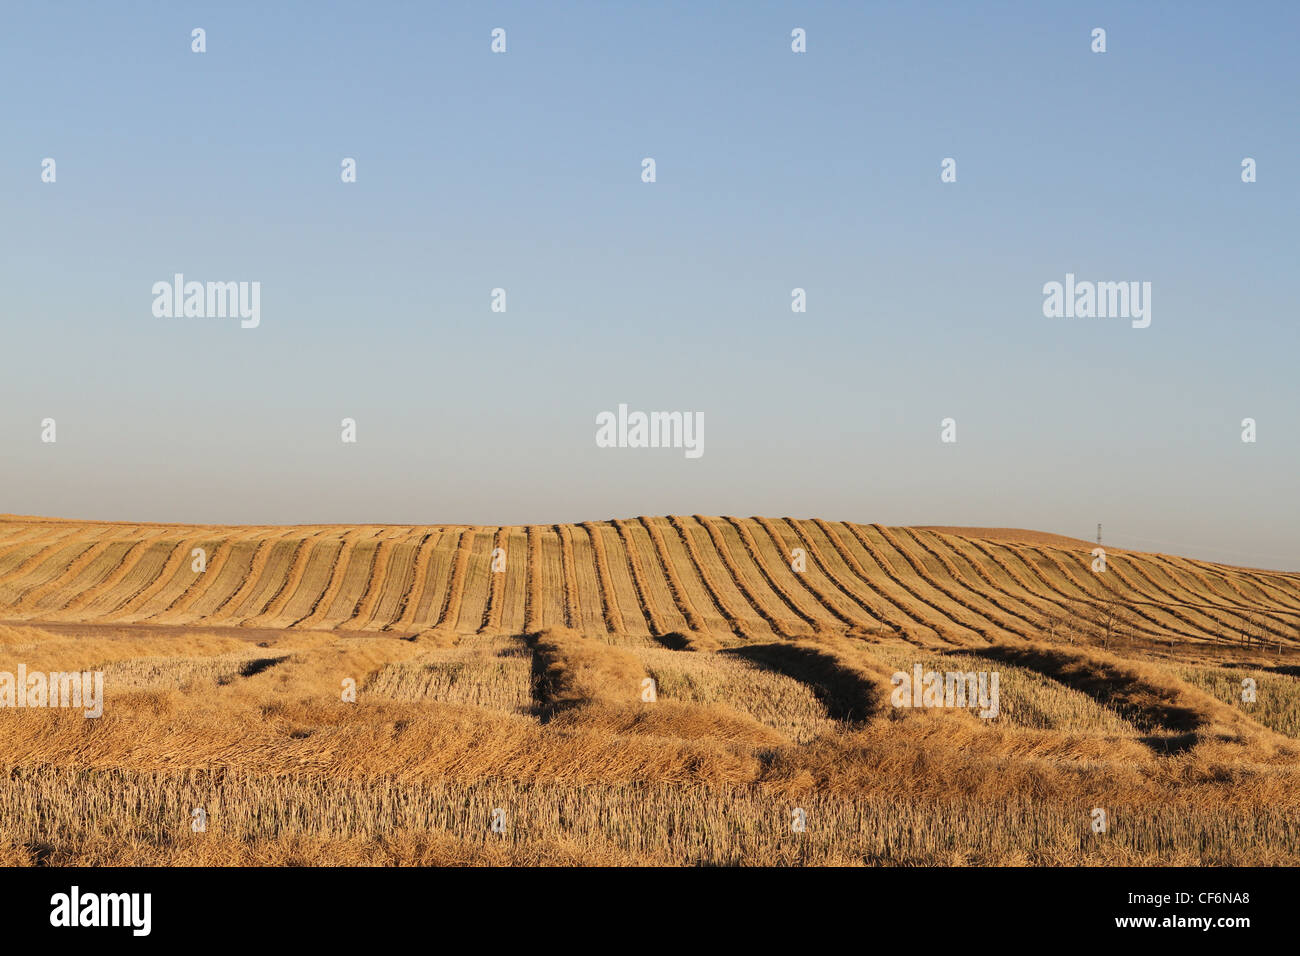 AGRICULTURE IN THE CANADIAN PRAIRIES GRAIN FARMING.  a field of swathed grain. Stock Photo